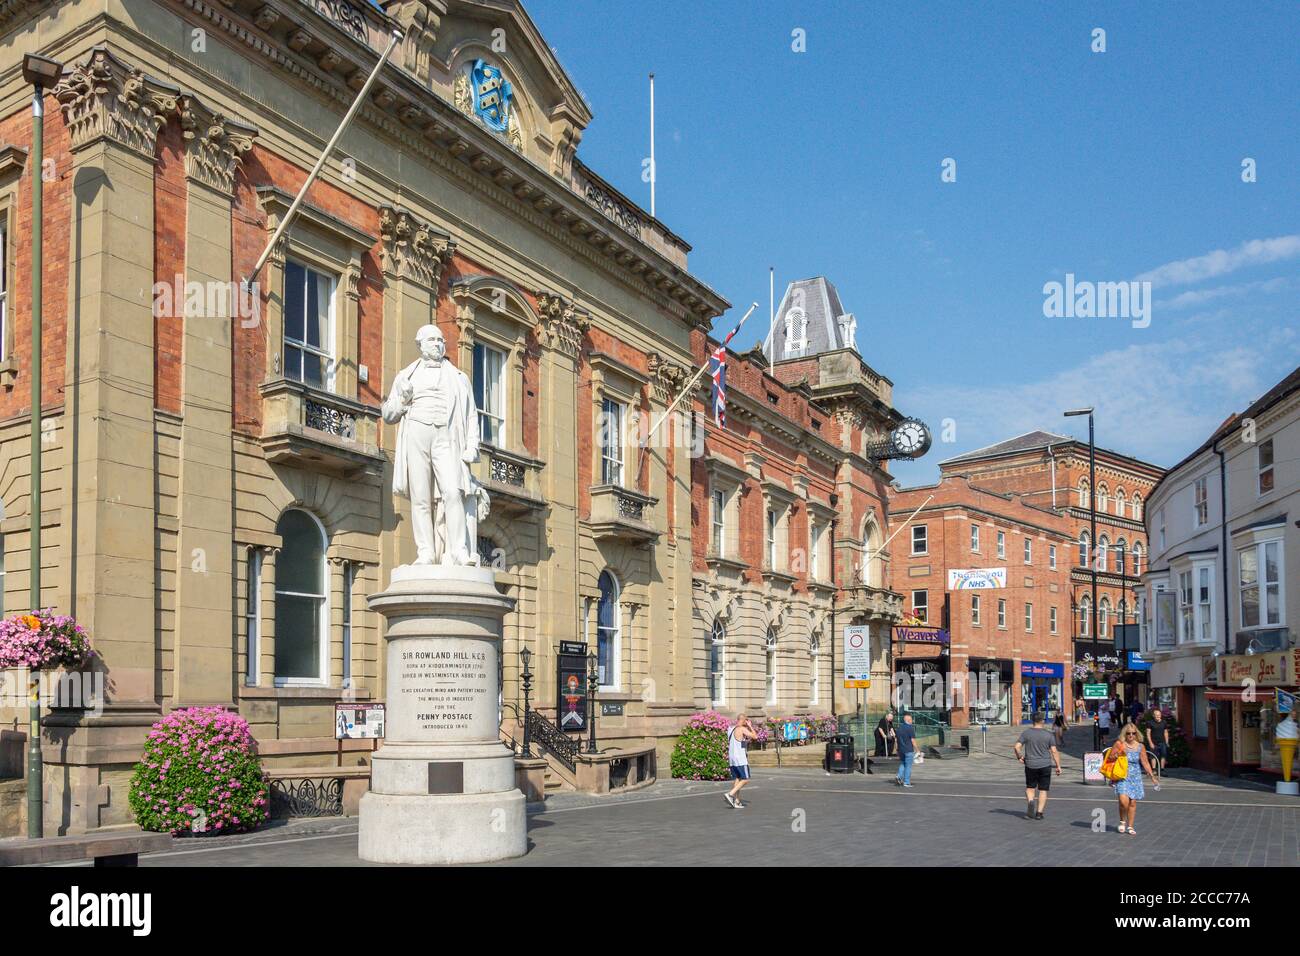 Kidderminster Town Hall and Sir Rowland Hill Statue, Vicar Street, Kidderminster, Worcestershire, England, United Kingdom Stock Photo